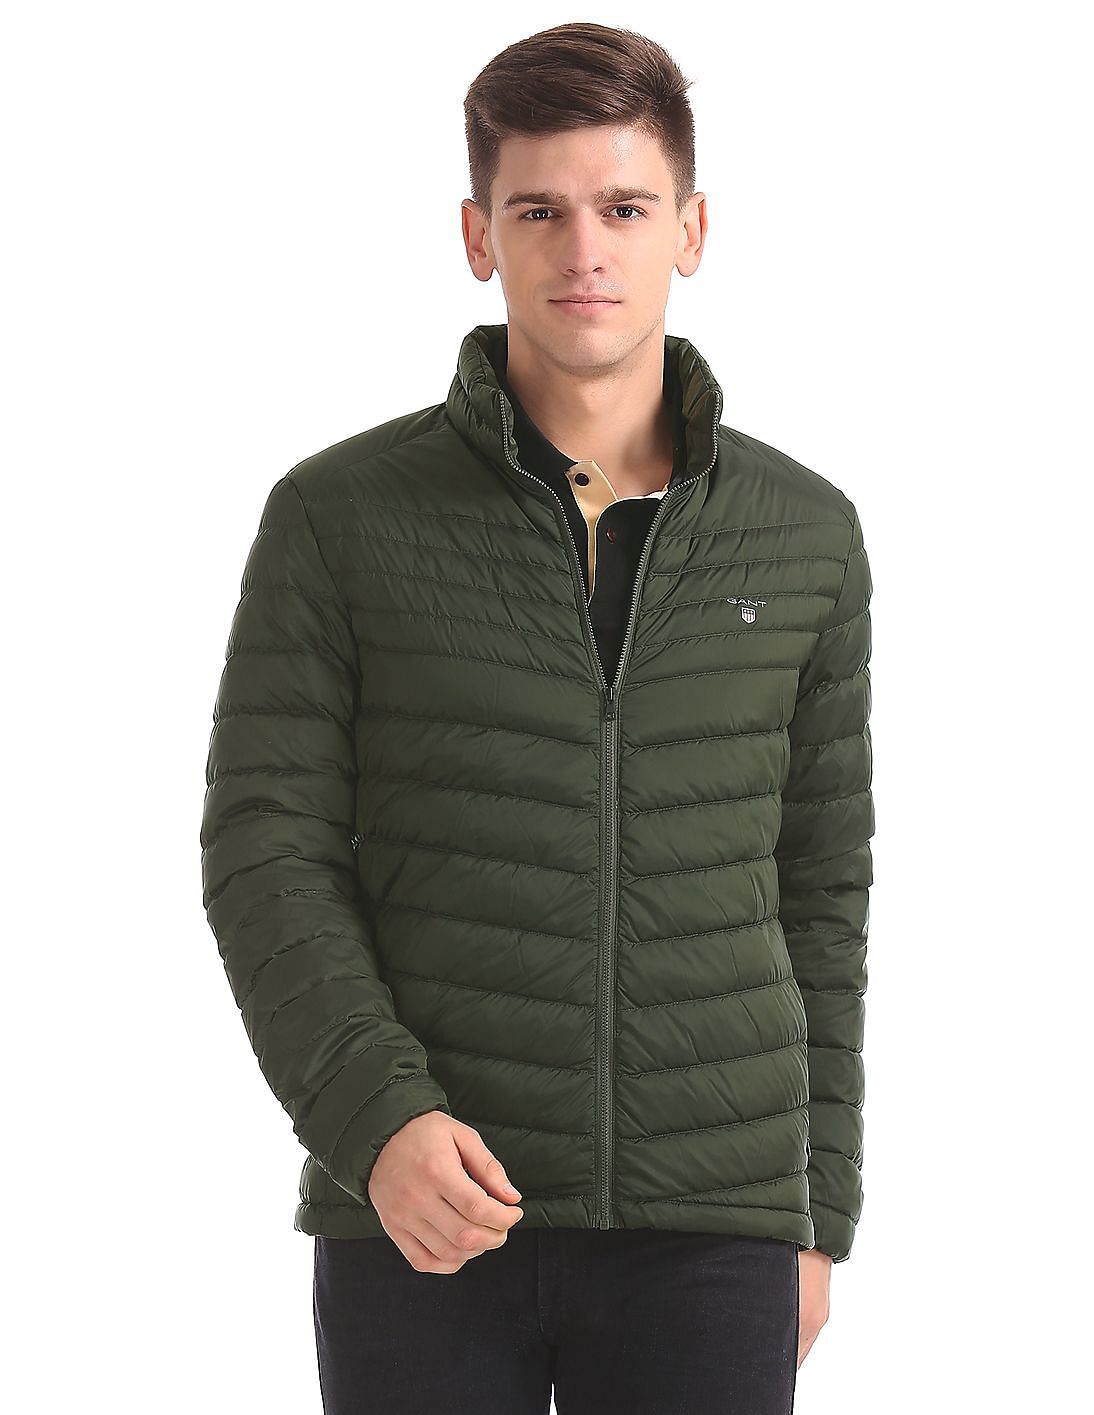 Buy Men Original The Airlight Down Jacket online at NNNOW.com